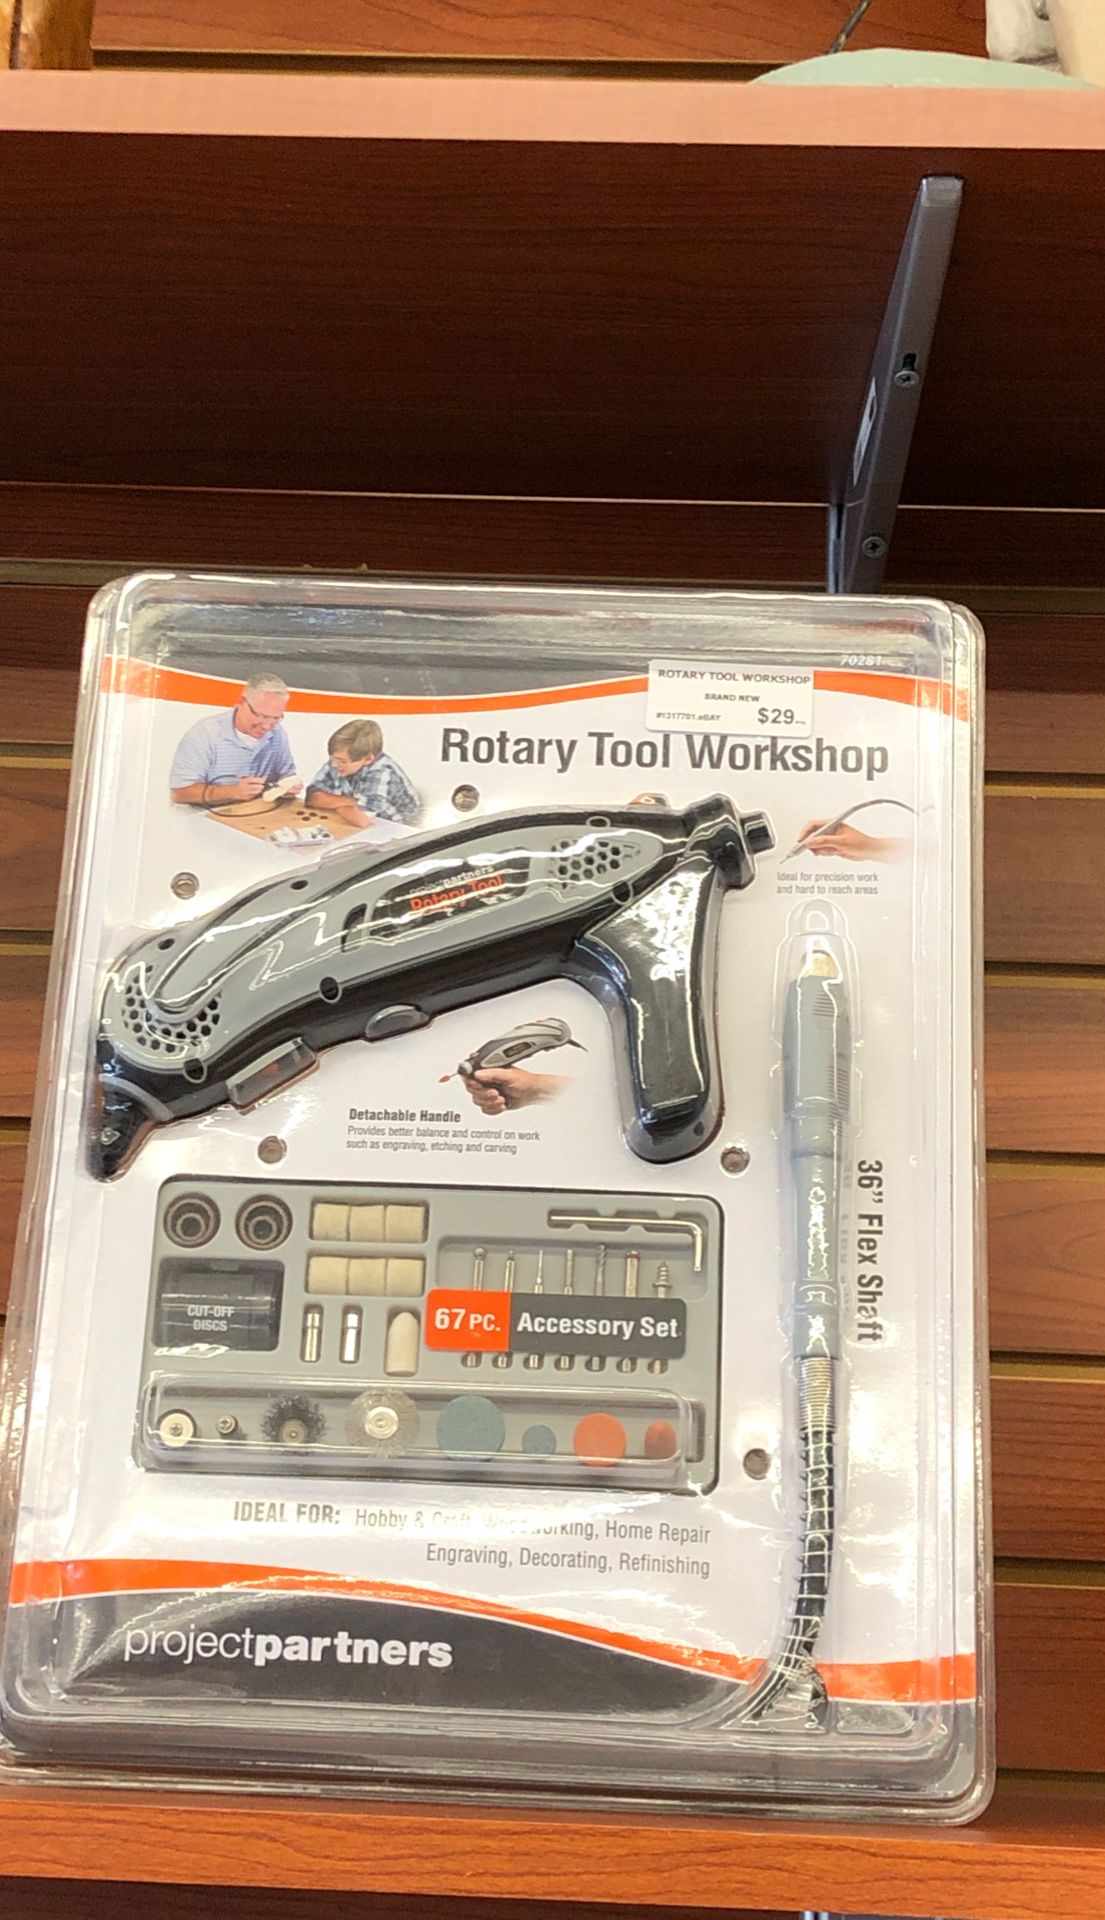 Rotary Tool dremel Brand New with accessories